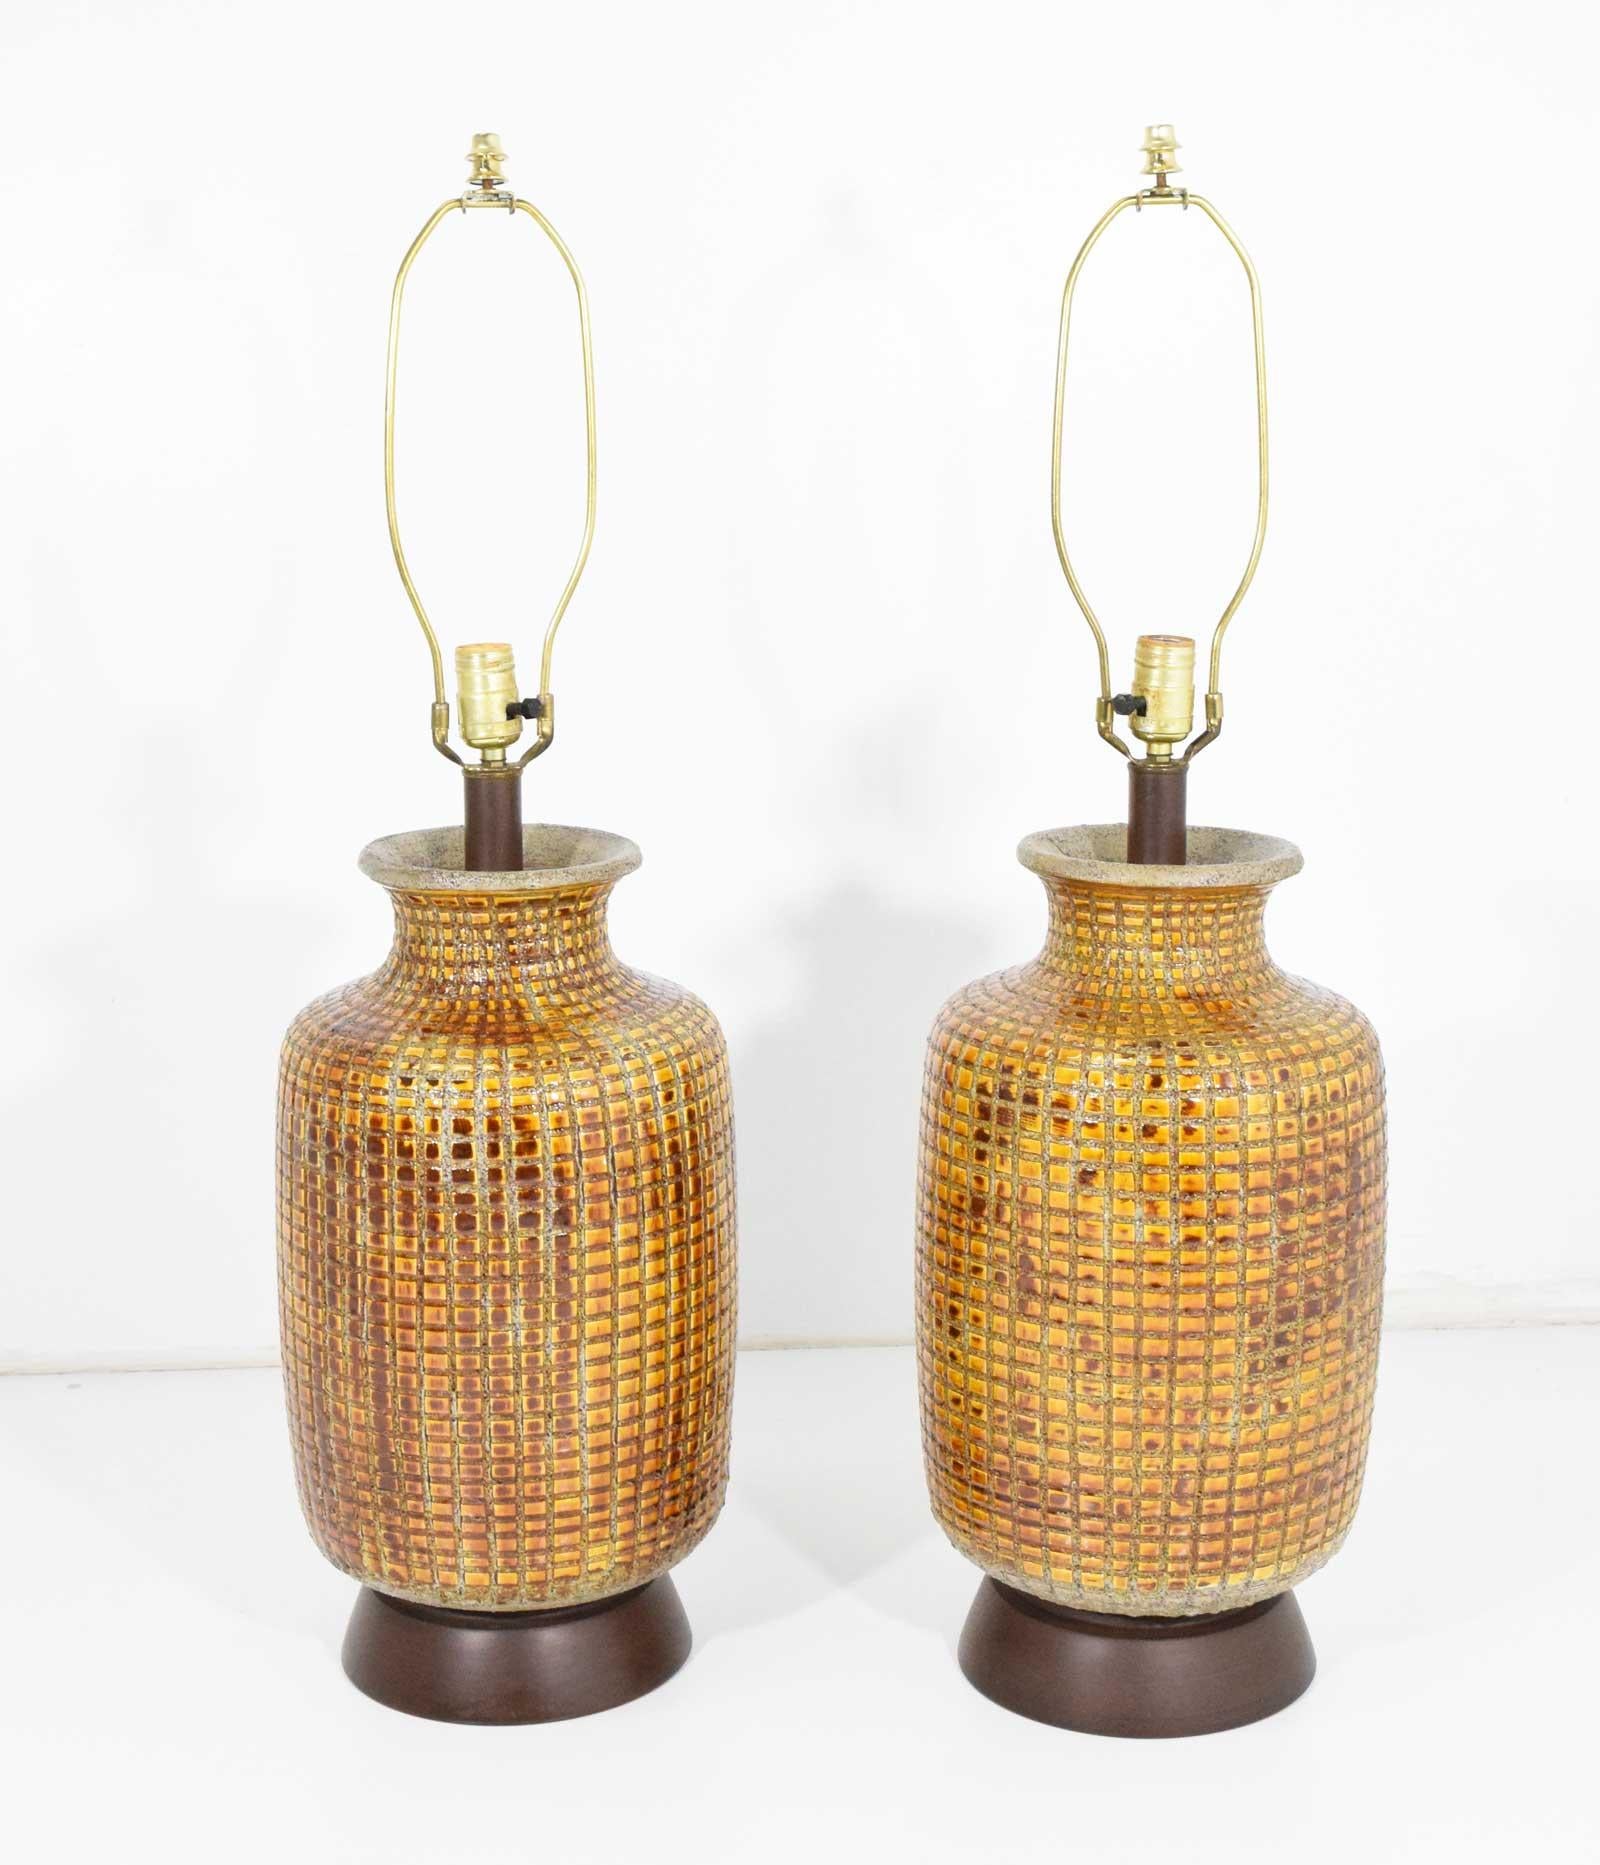 Beautiful pair of large midcentury table lamps. Ceramic is deeply incised and handcut tile is inlaid to create pattern. Shades not included. Measurement is to socket.